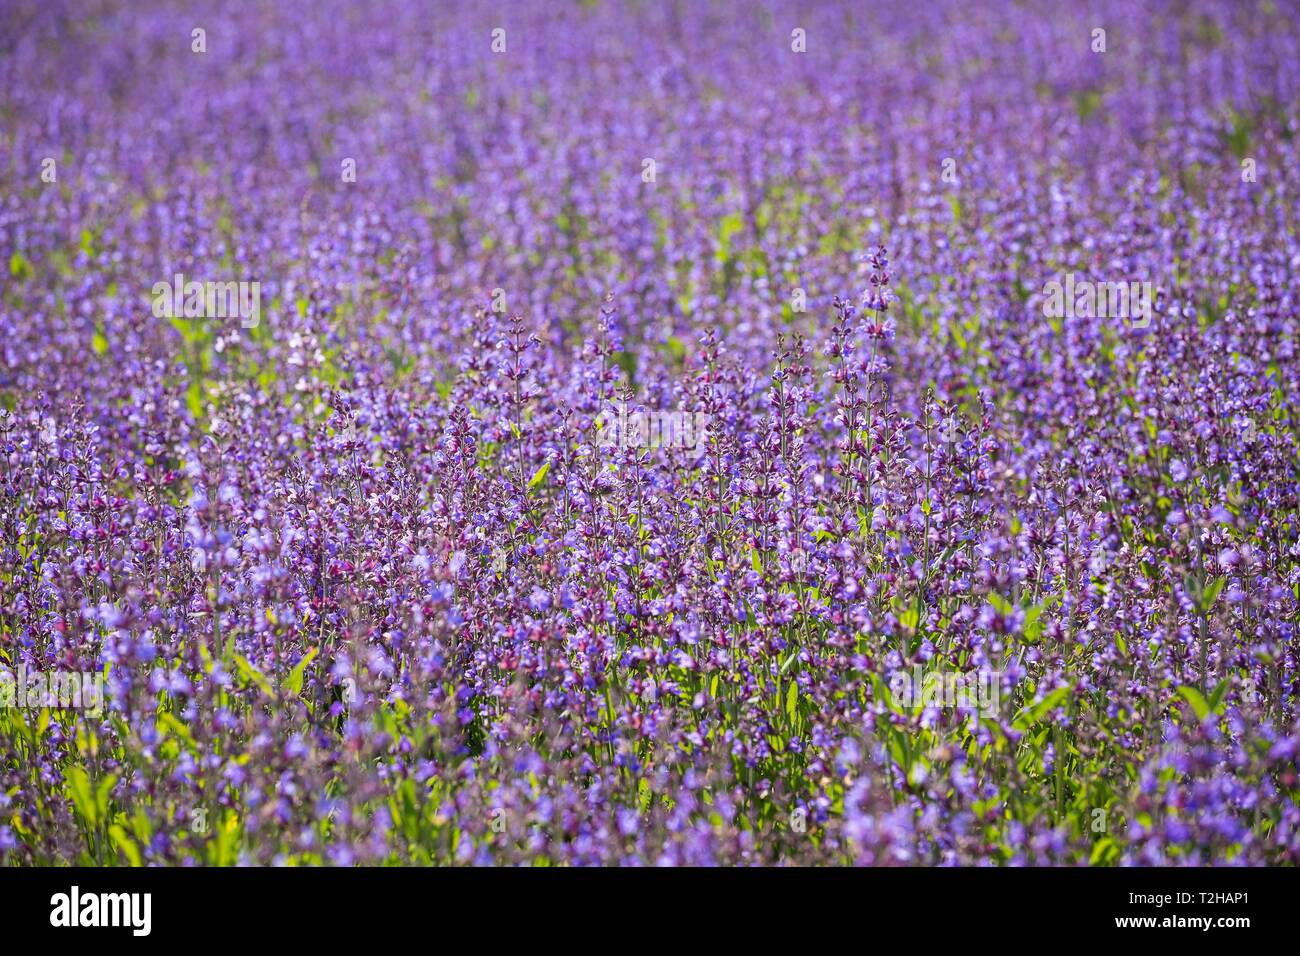 Field with flowering sage (salvia officinalis), cultivation, Freital, Saxony, Germany Stock Photo